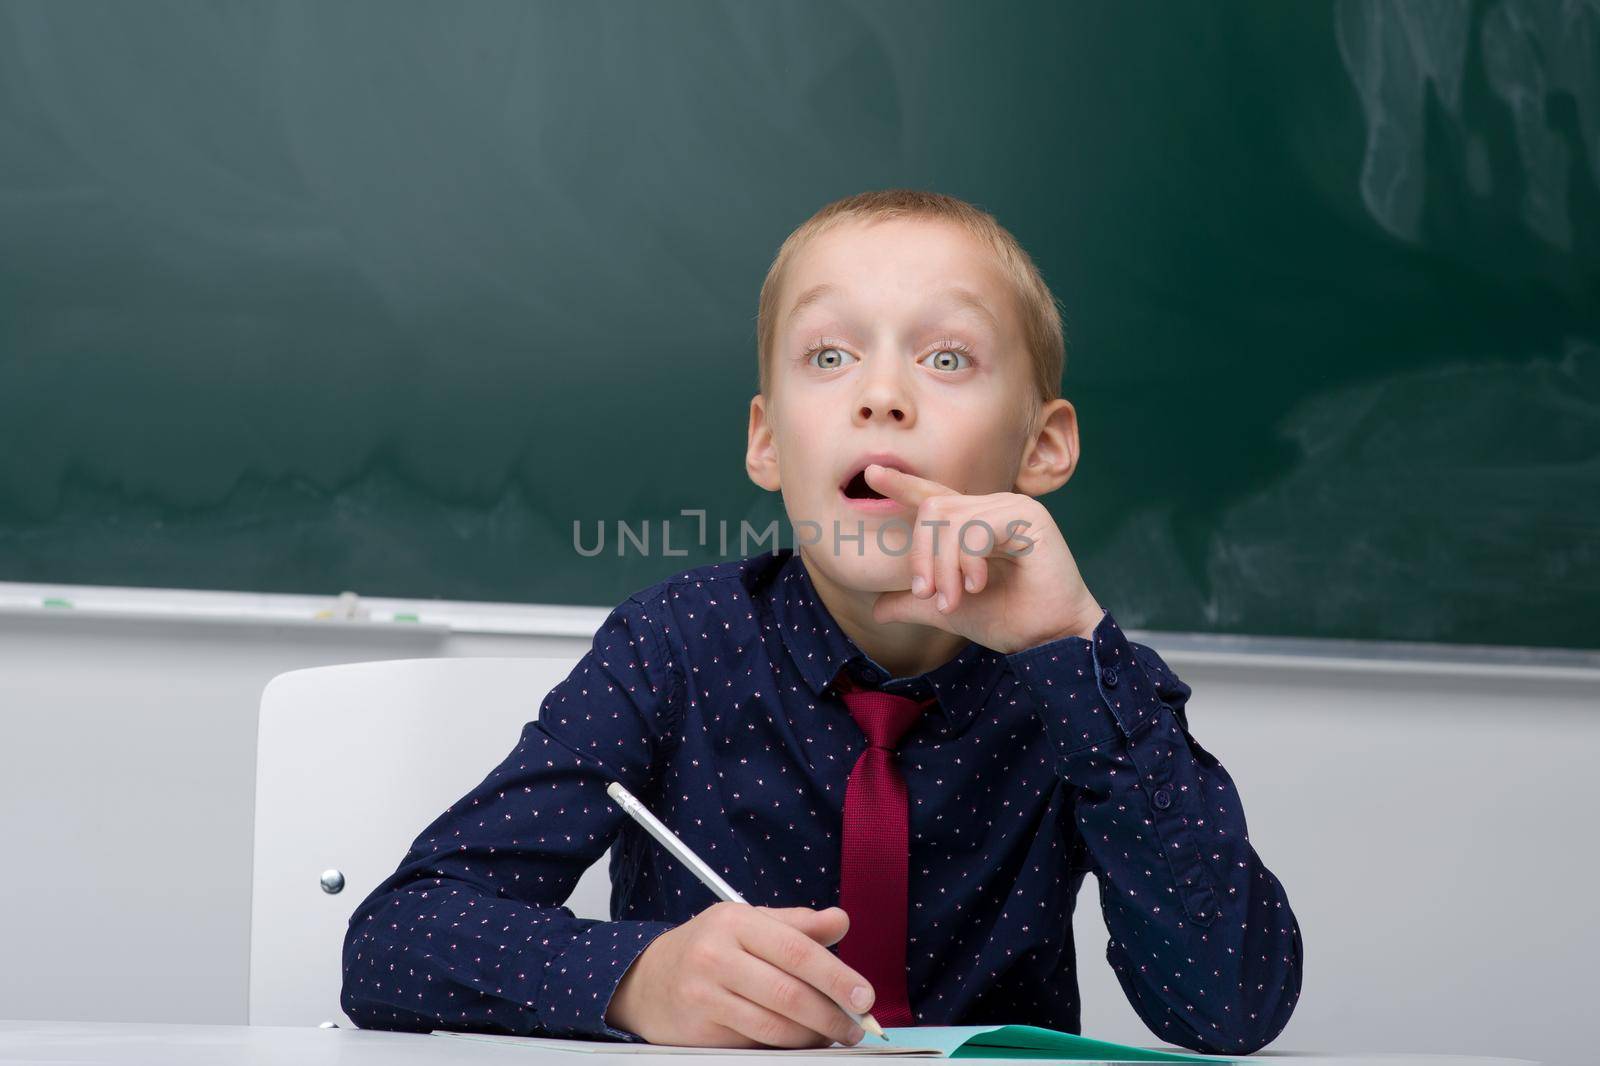 Thinking schoolboy studying at school. Boy student in blue shirt and necktie sitting at desk on background of blackboard in classroom. Back to school, education concept